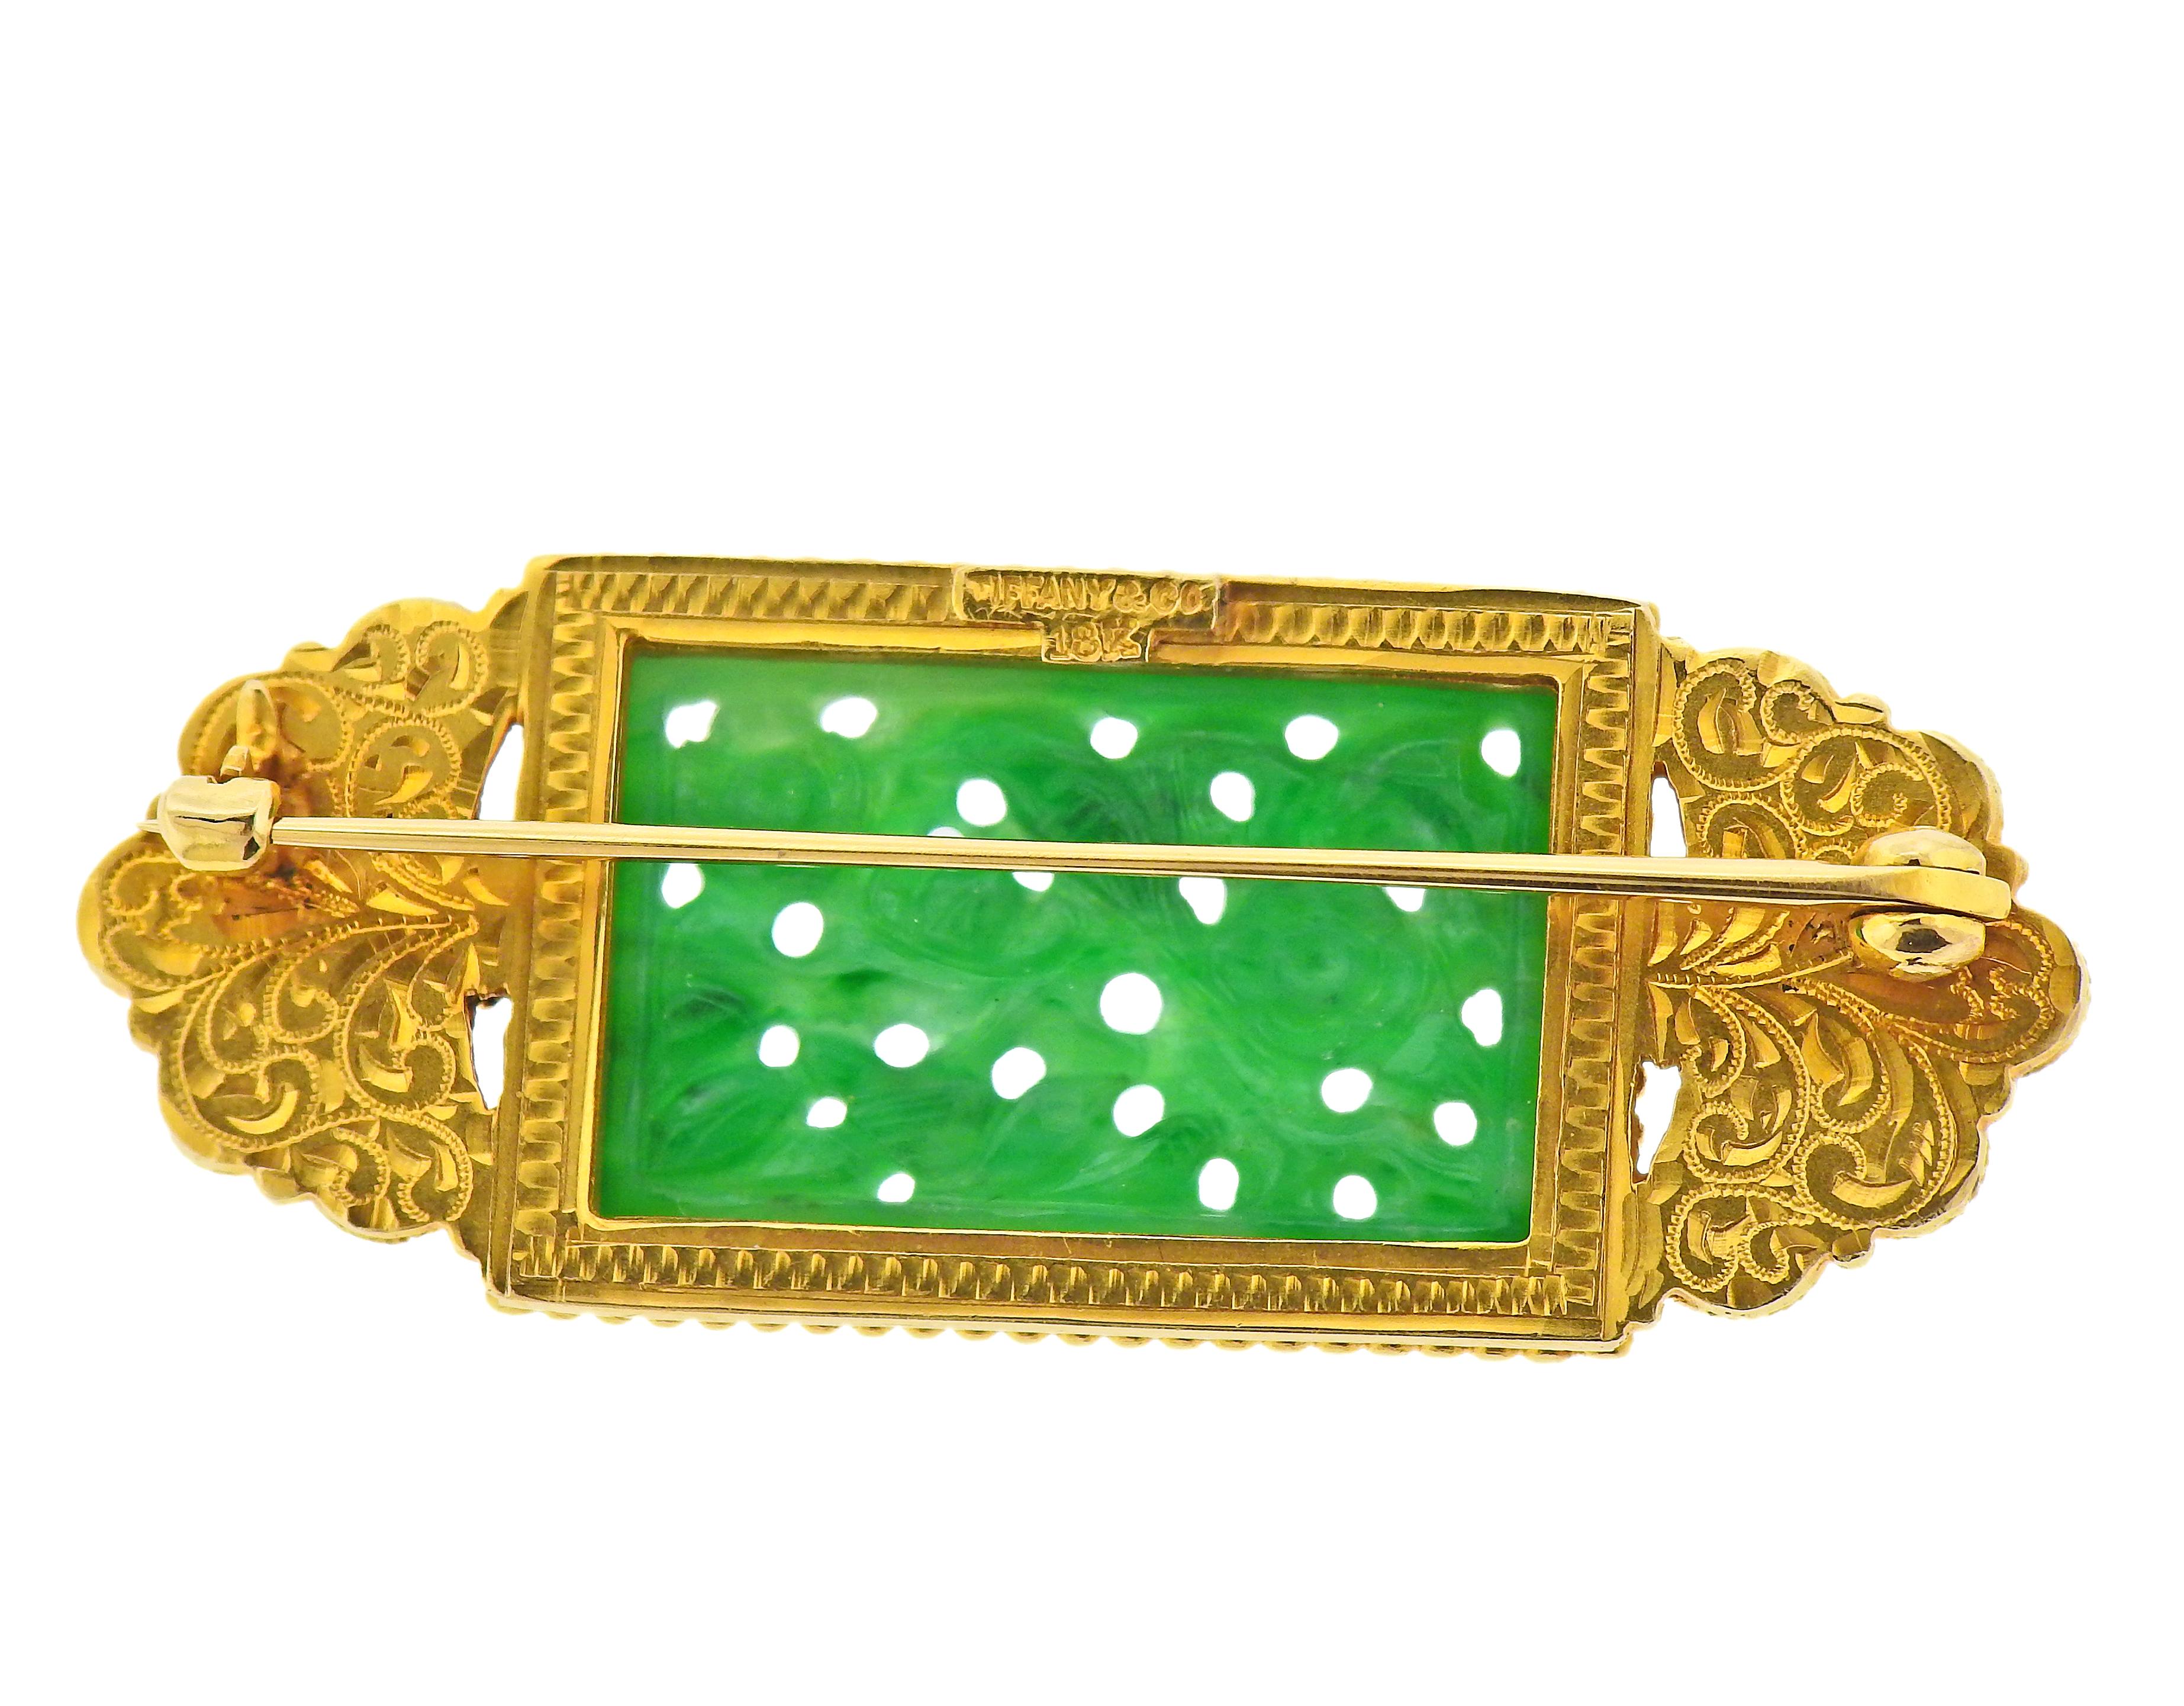 Antique Tiffany & Co 18k gold brooch with carved jade. Brooch measures 52mm x 20mm. Center jade - 16mm x 25mm. Marked: Tiffany & Co 18k. Weight - 14.2 grams. 